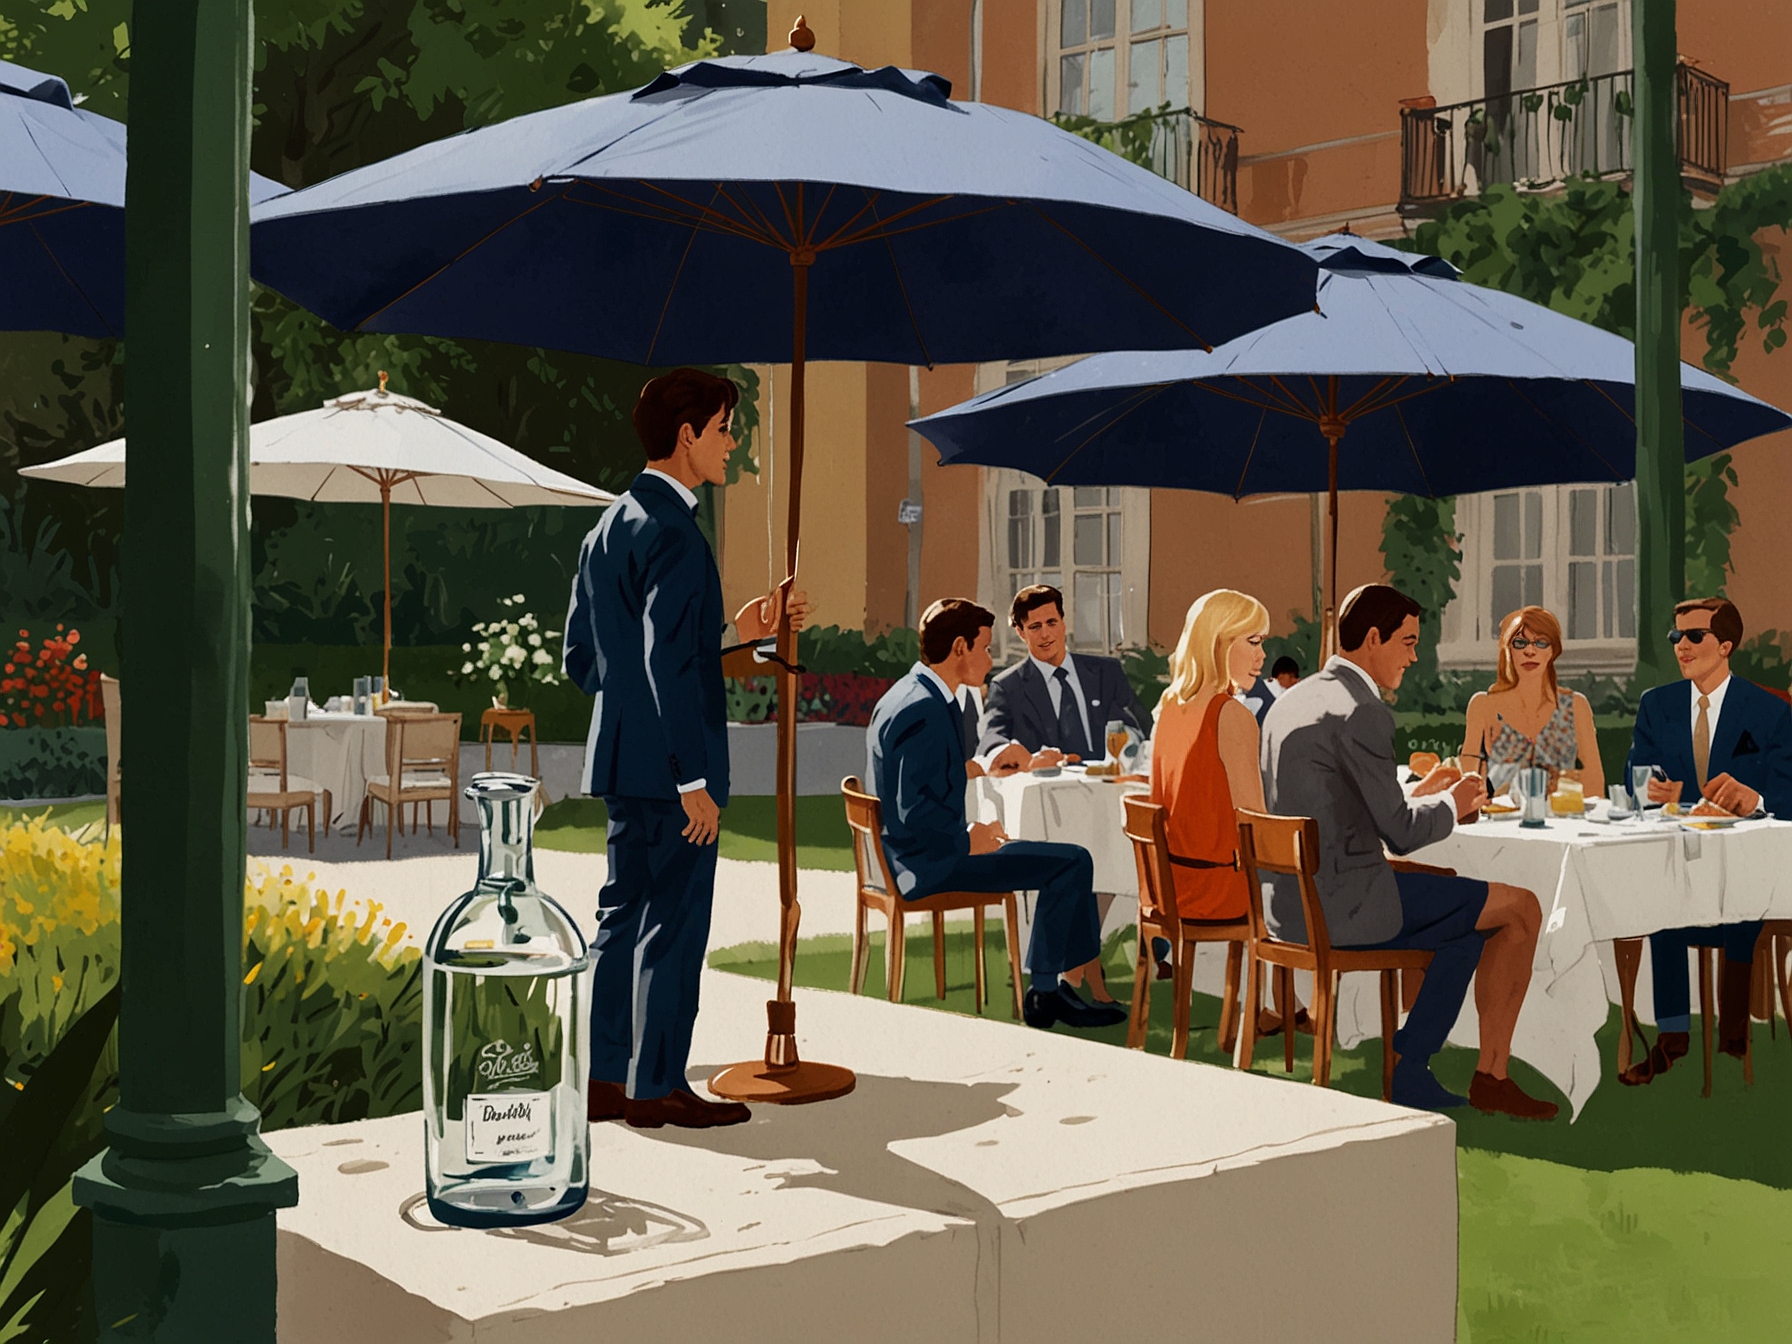 An outdoor garden setting at Milan Fashion Week, with models showcasing Dunhill SS25 collection. Umbrellas provided shade while guests enjoyed refreshing beverages, epitomizing British luxury.